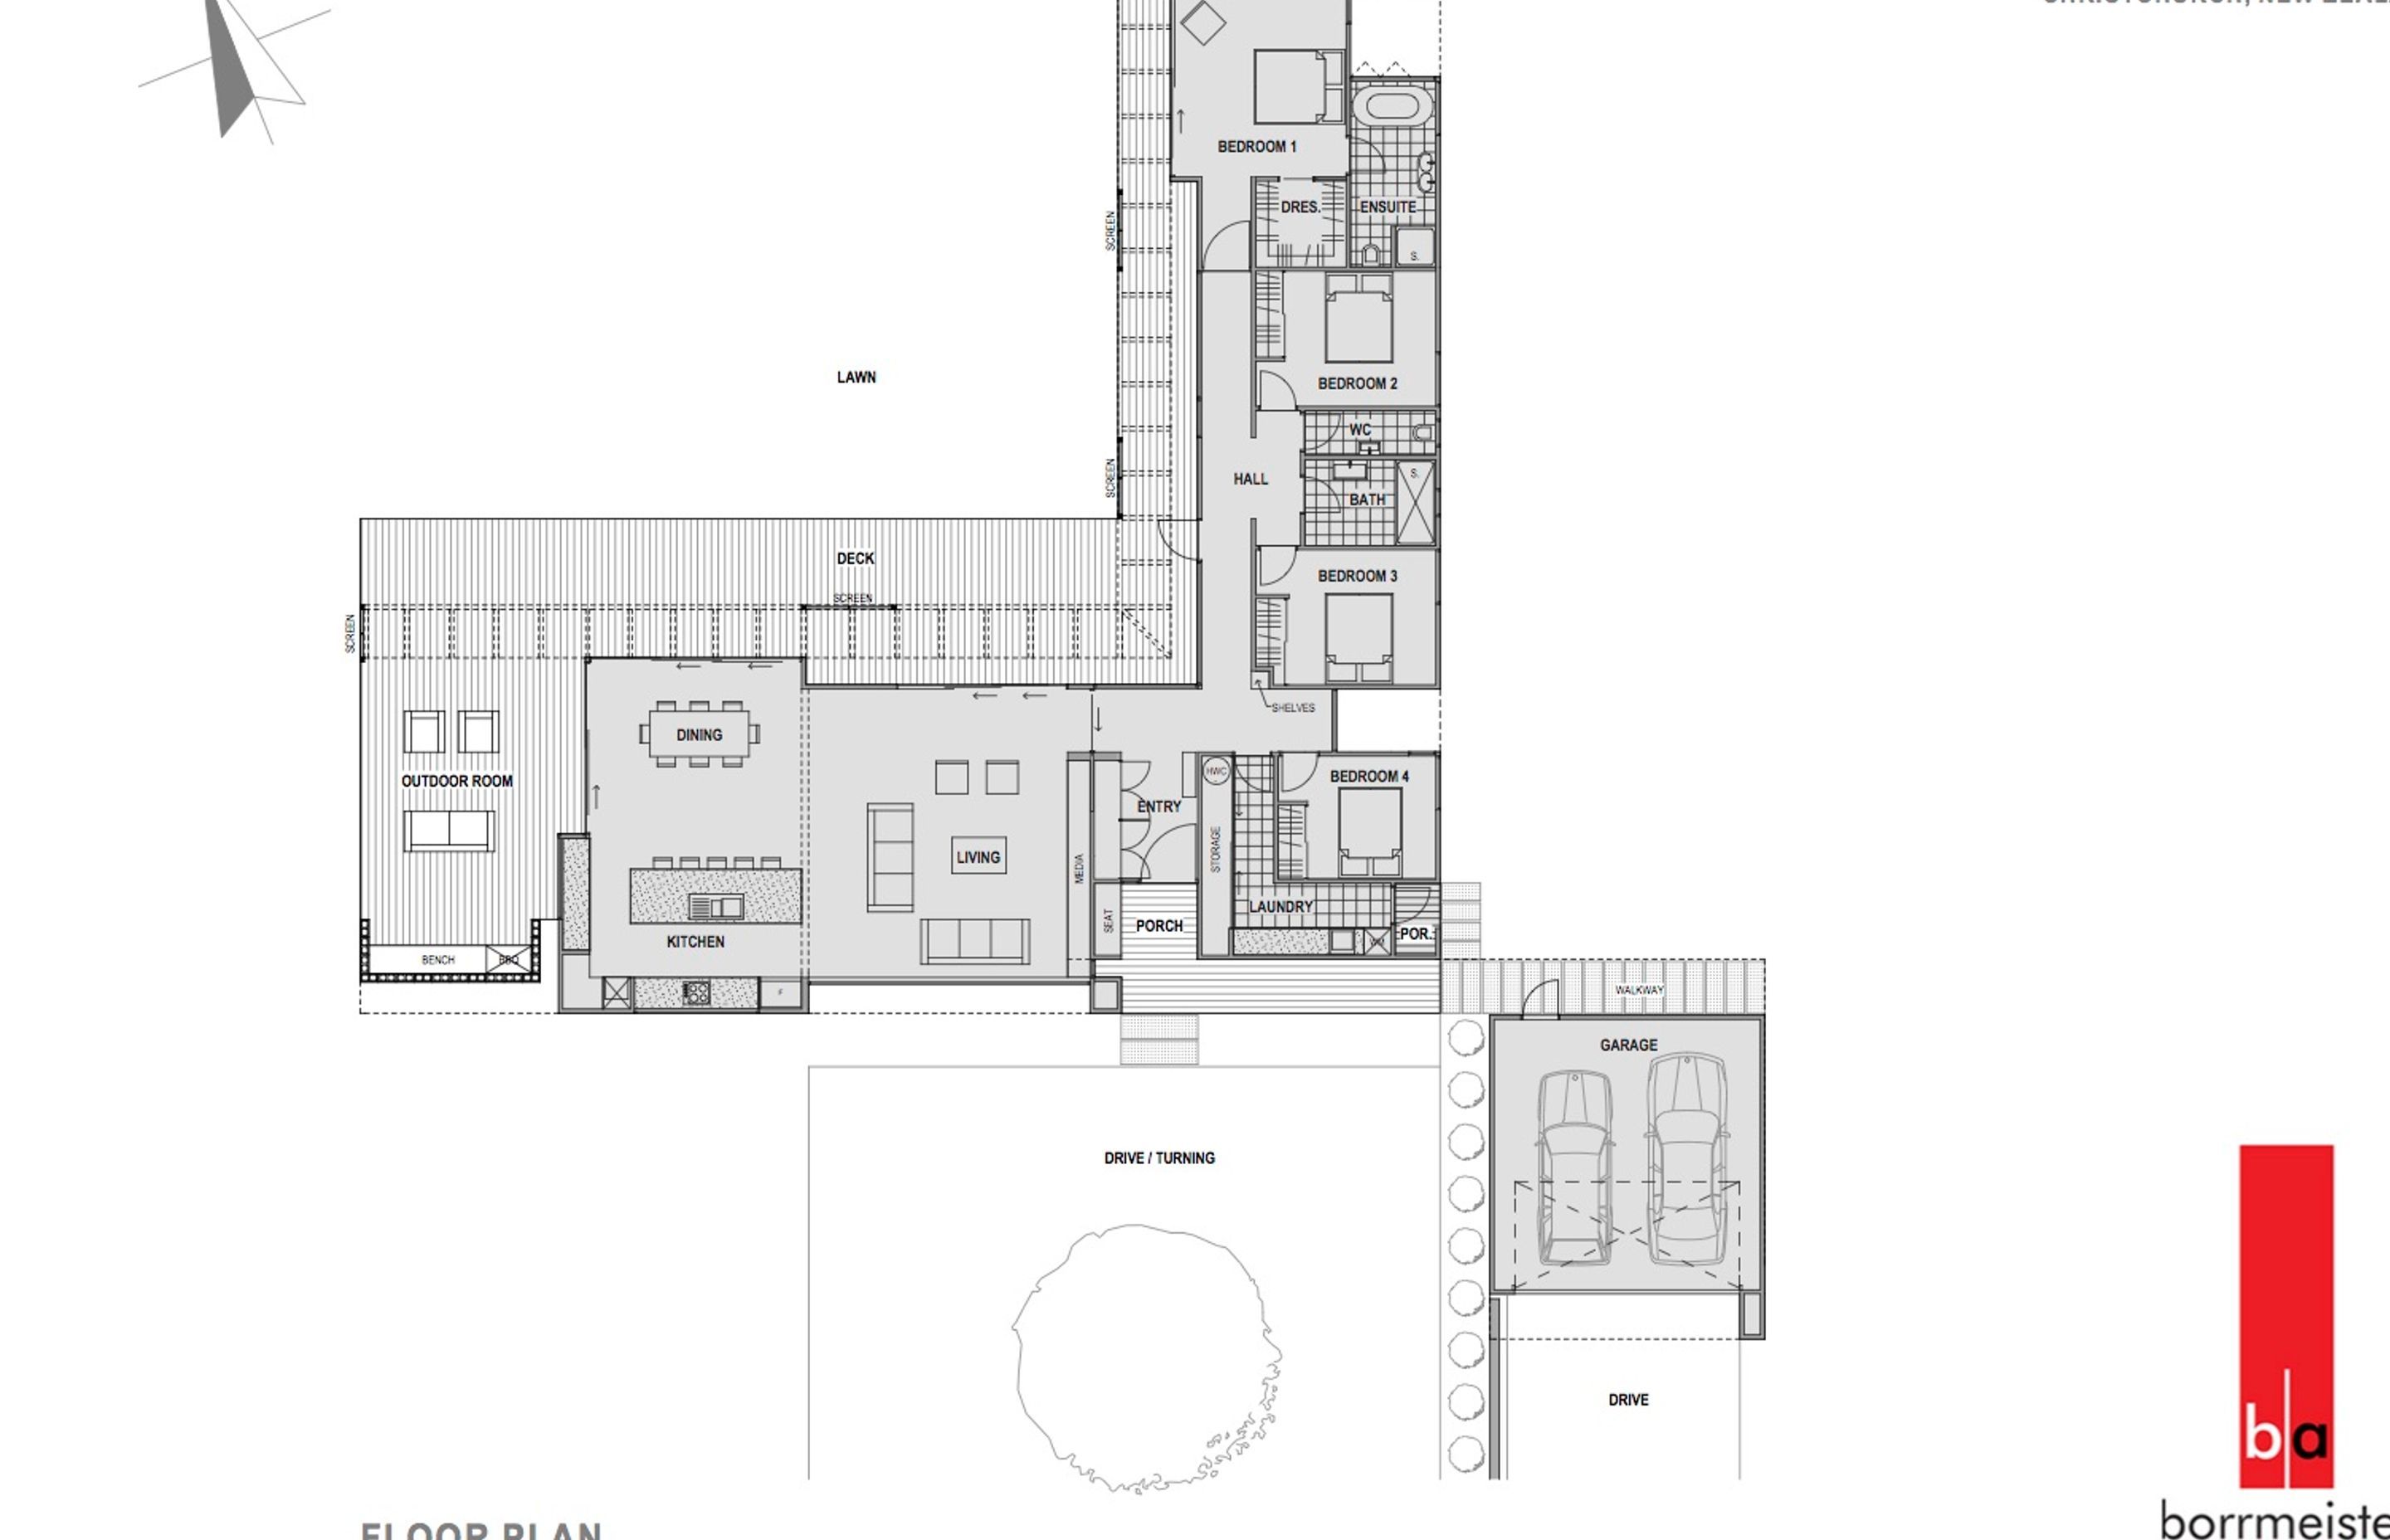 Wings House floor plan by Borrmeister Architects.